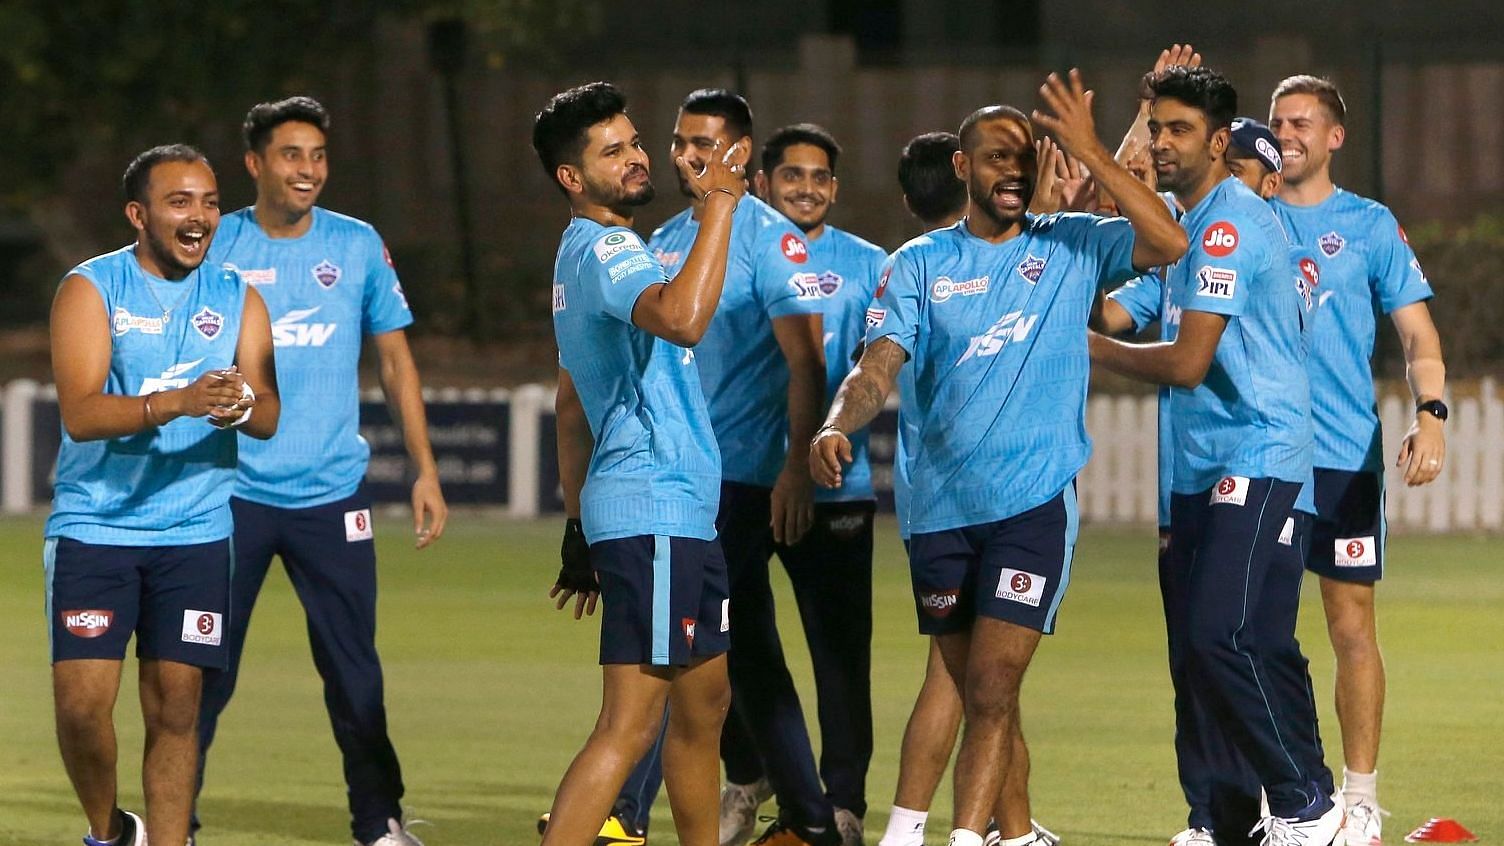 Delhi Capitals look as formidable a side as any you can get in franchise-based T20 cricket league. 